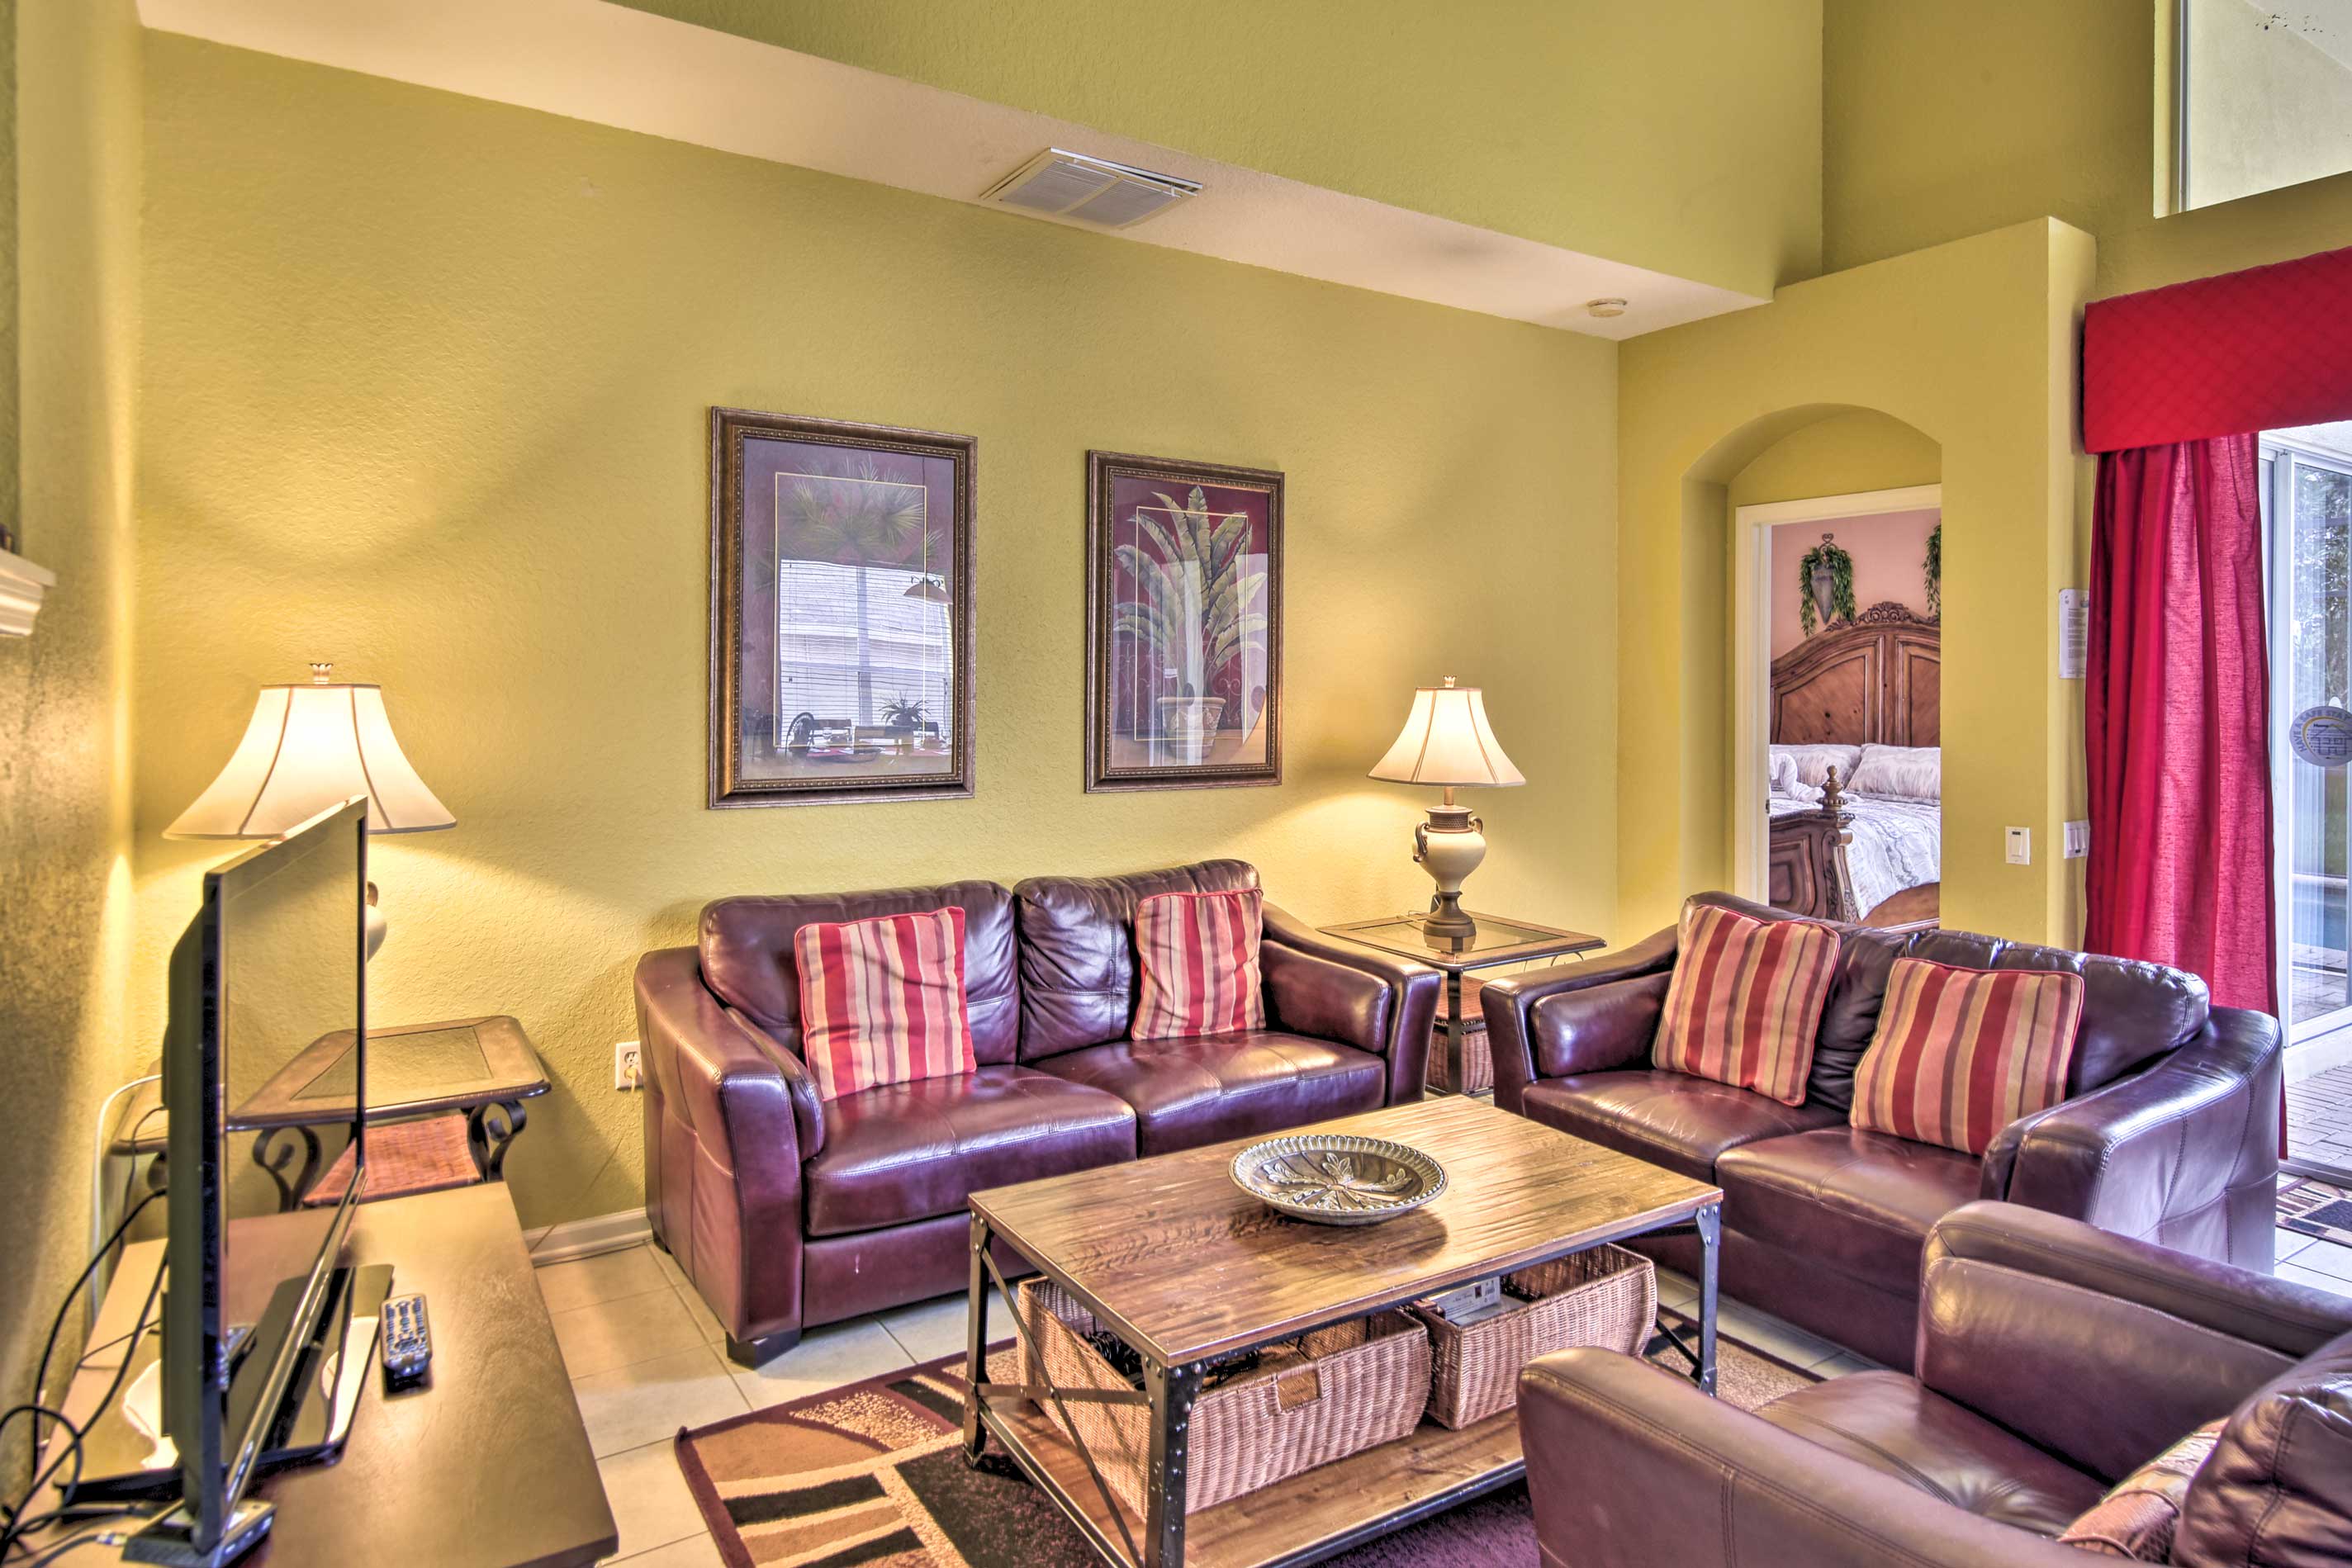 Bring your family to this charming 6-bed, 4-bath getaway in Orlando.